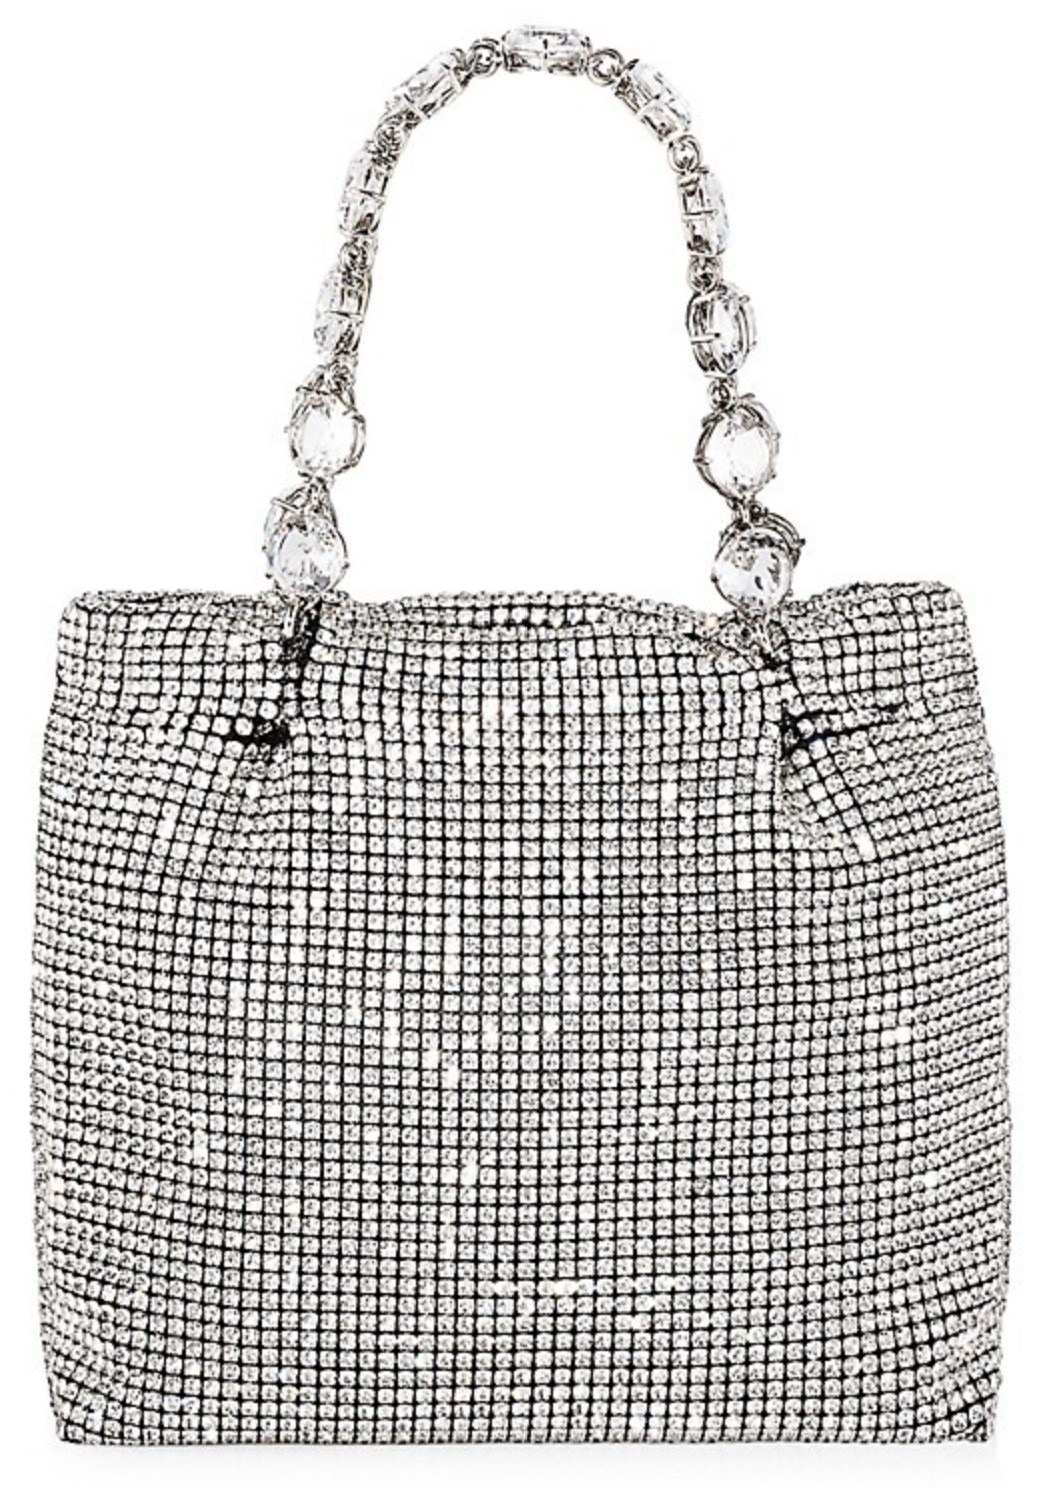 Galactic Bag (Silver Crystals) | style